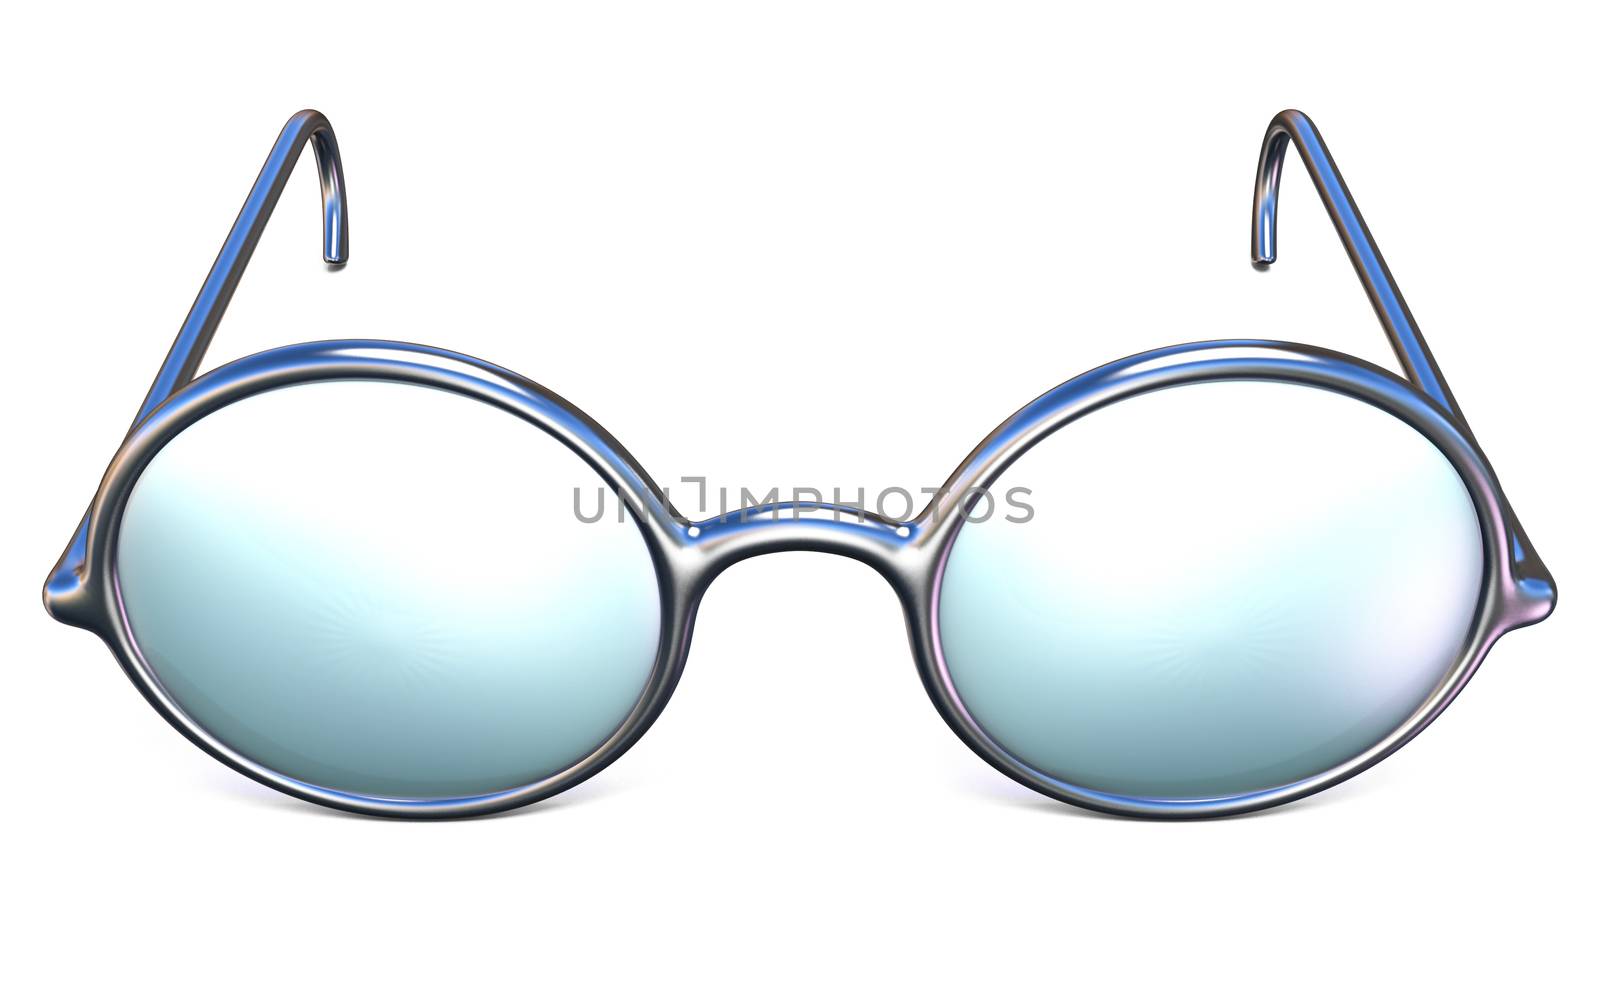 Retro silver glasses front view 3D rendering illustration isolated on white background